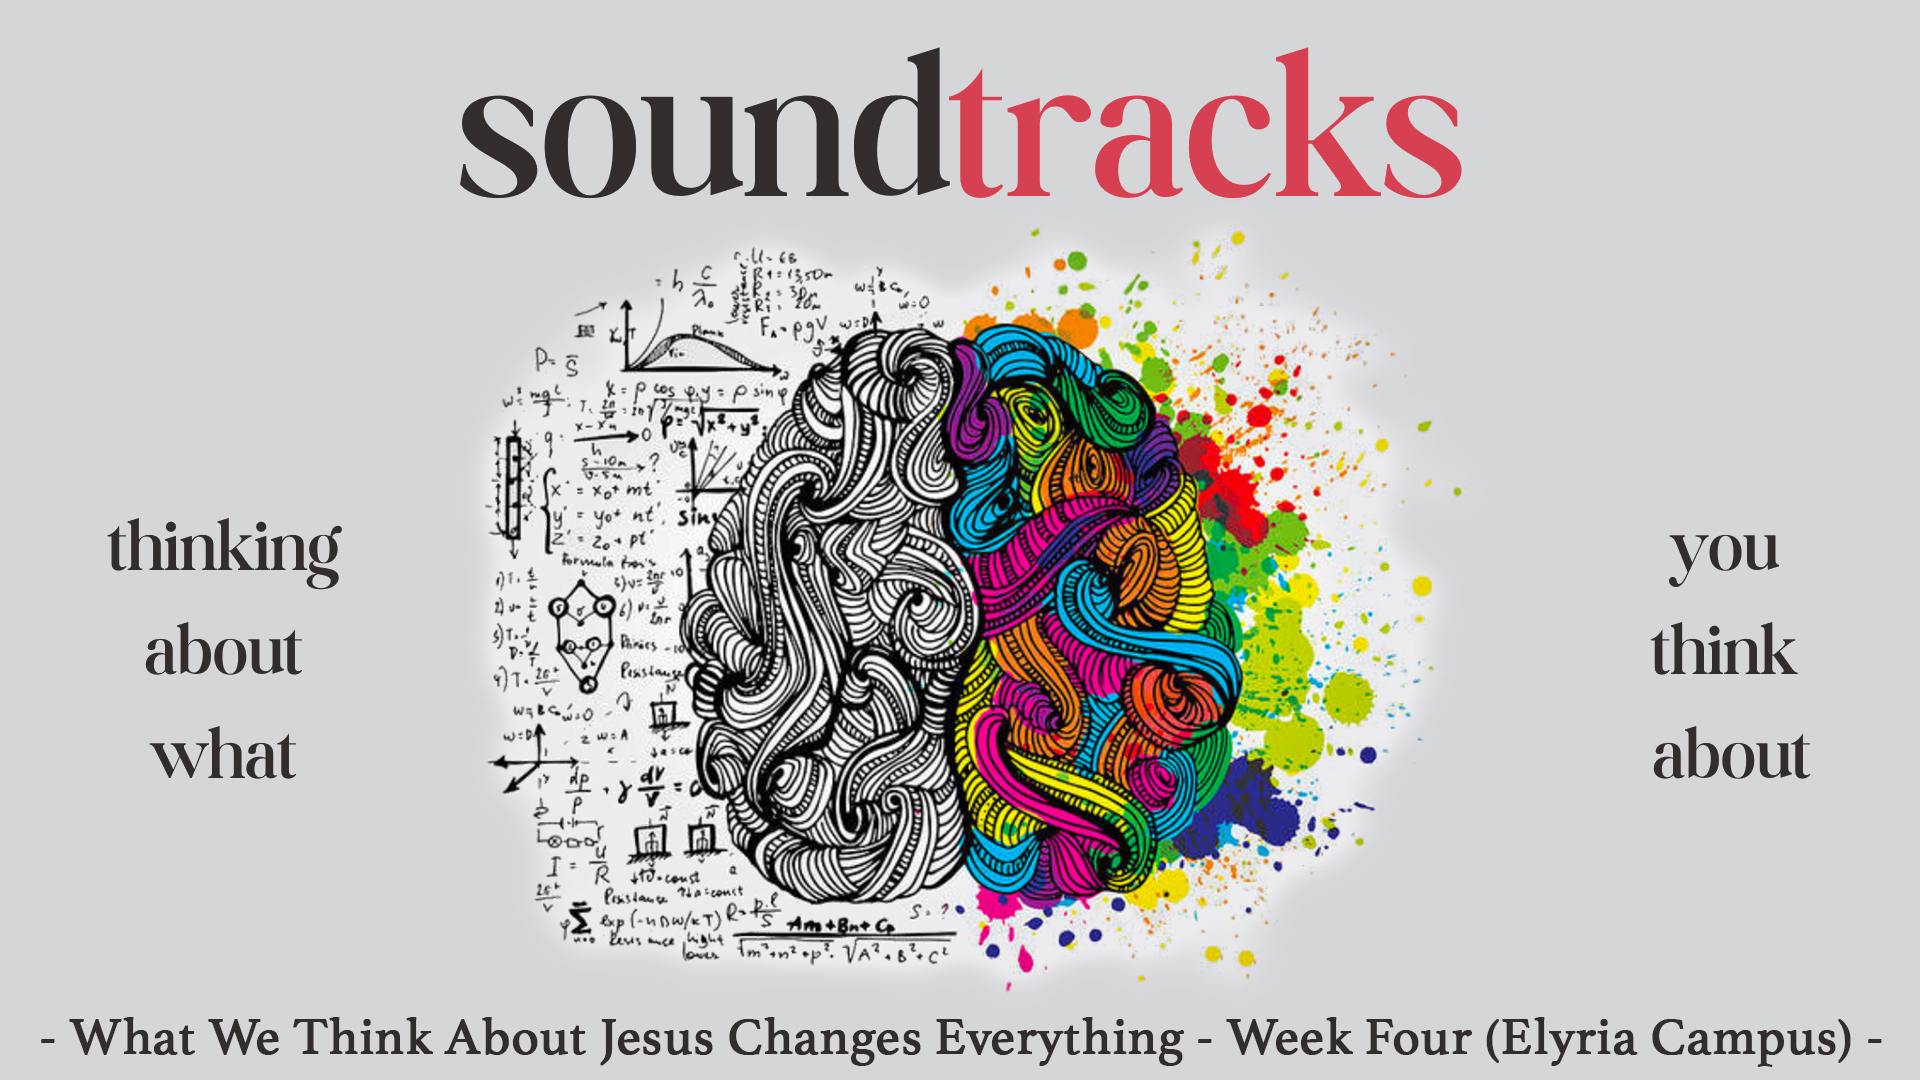 What We Think About Jesus Changes Everything - Week Four (Elyria Campus)